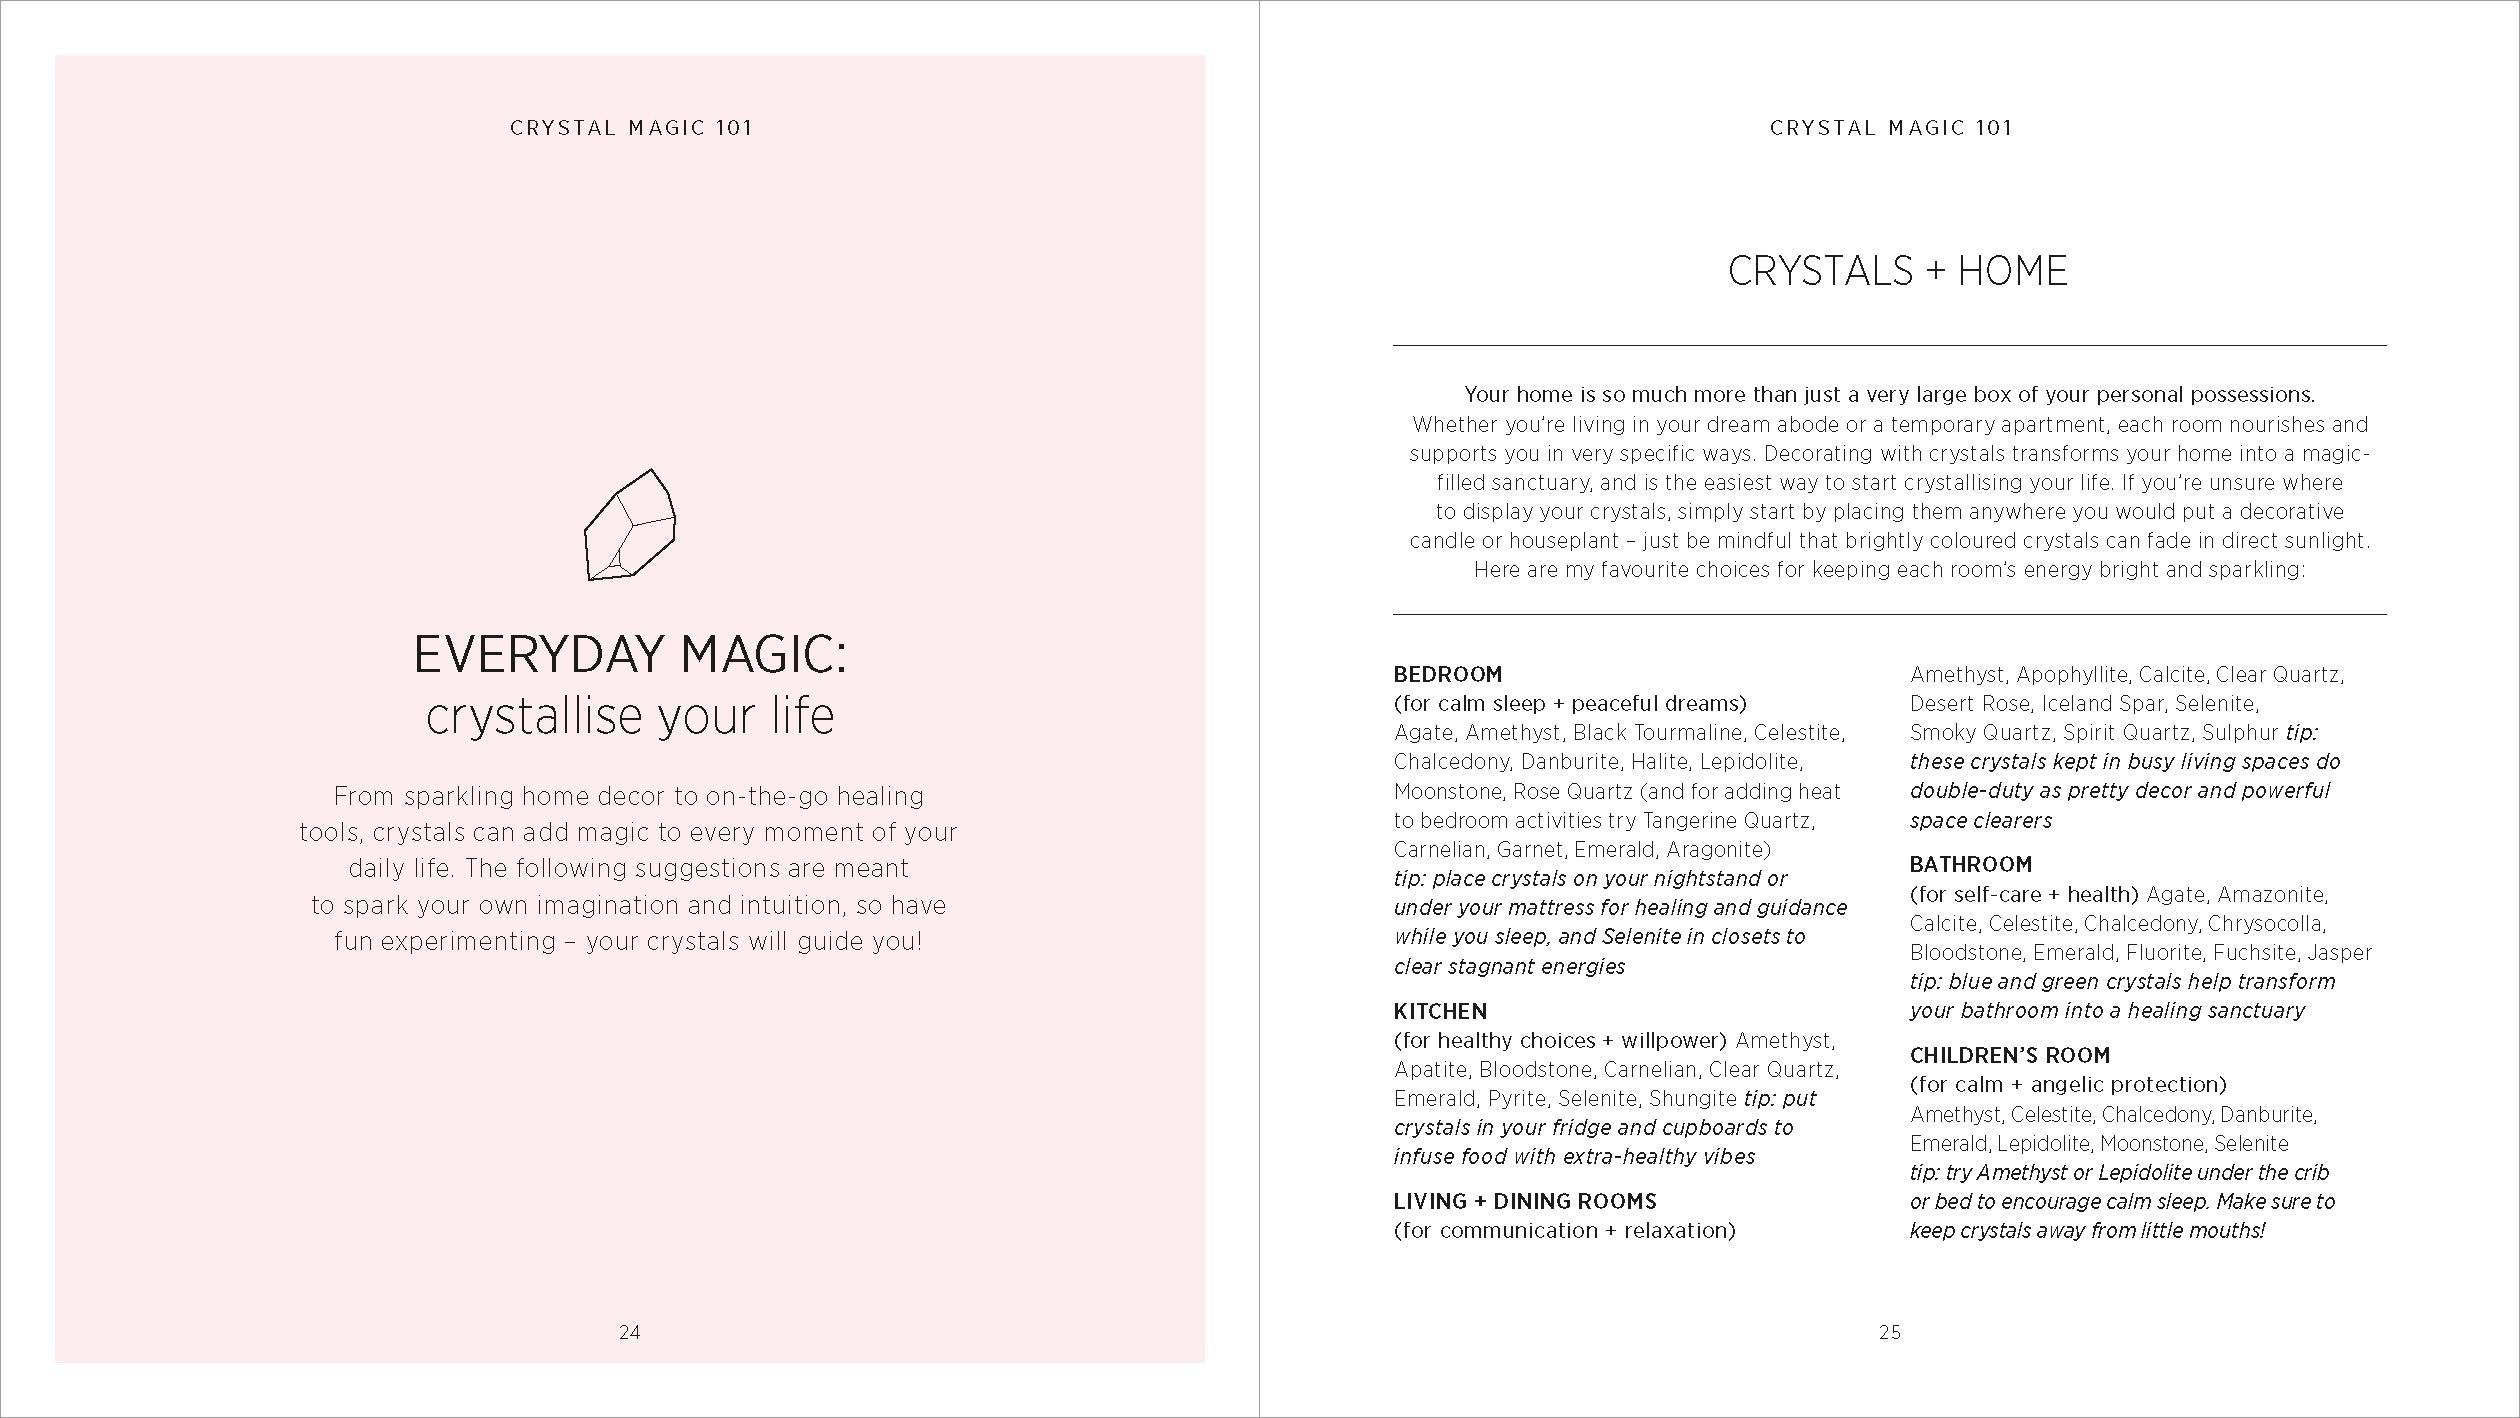 Crystals: The Modern Guide to Crystal Healing Book by Yulia Van Doren. What to do with Crystals. Crystal Guide for Beginners.